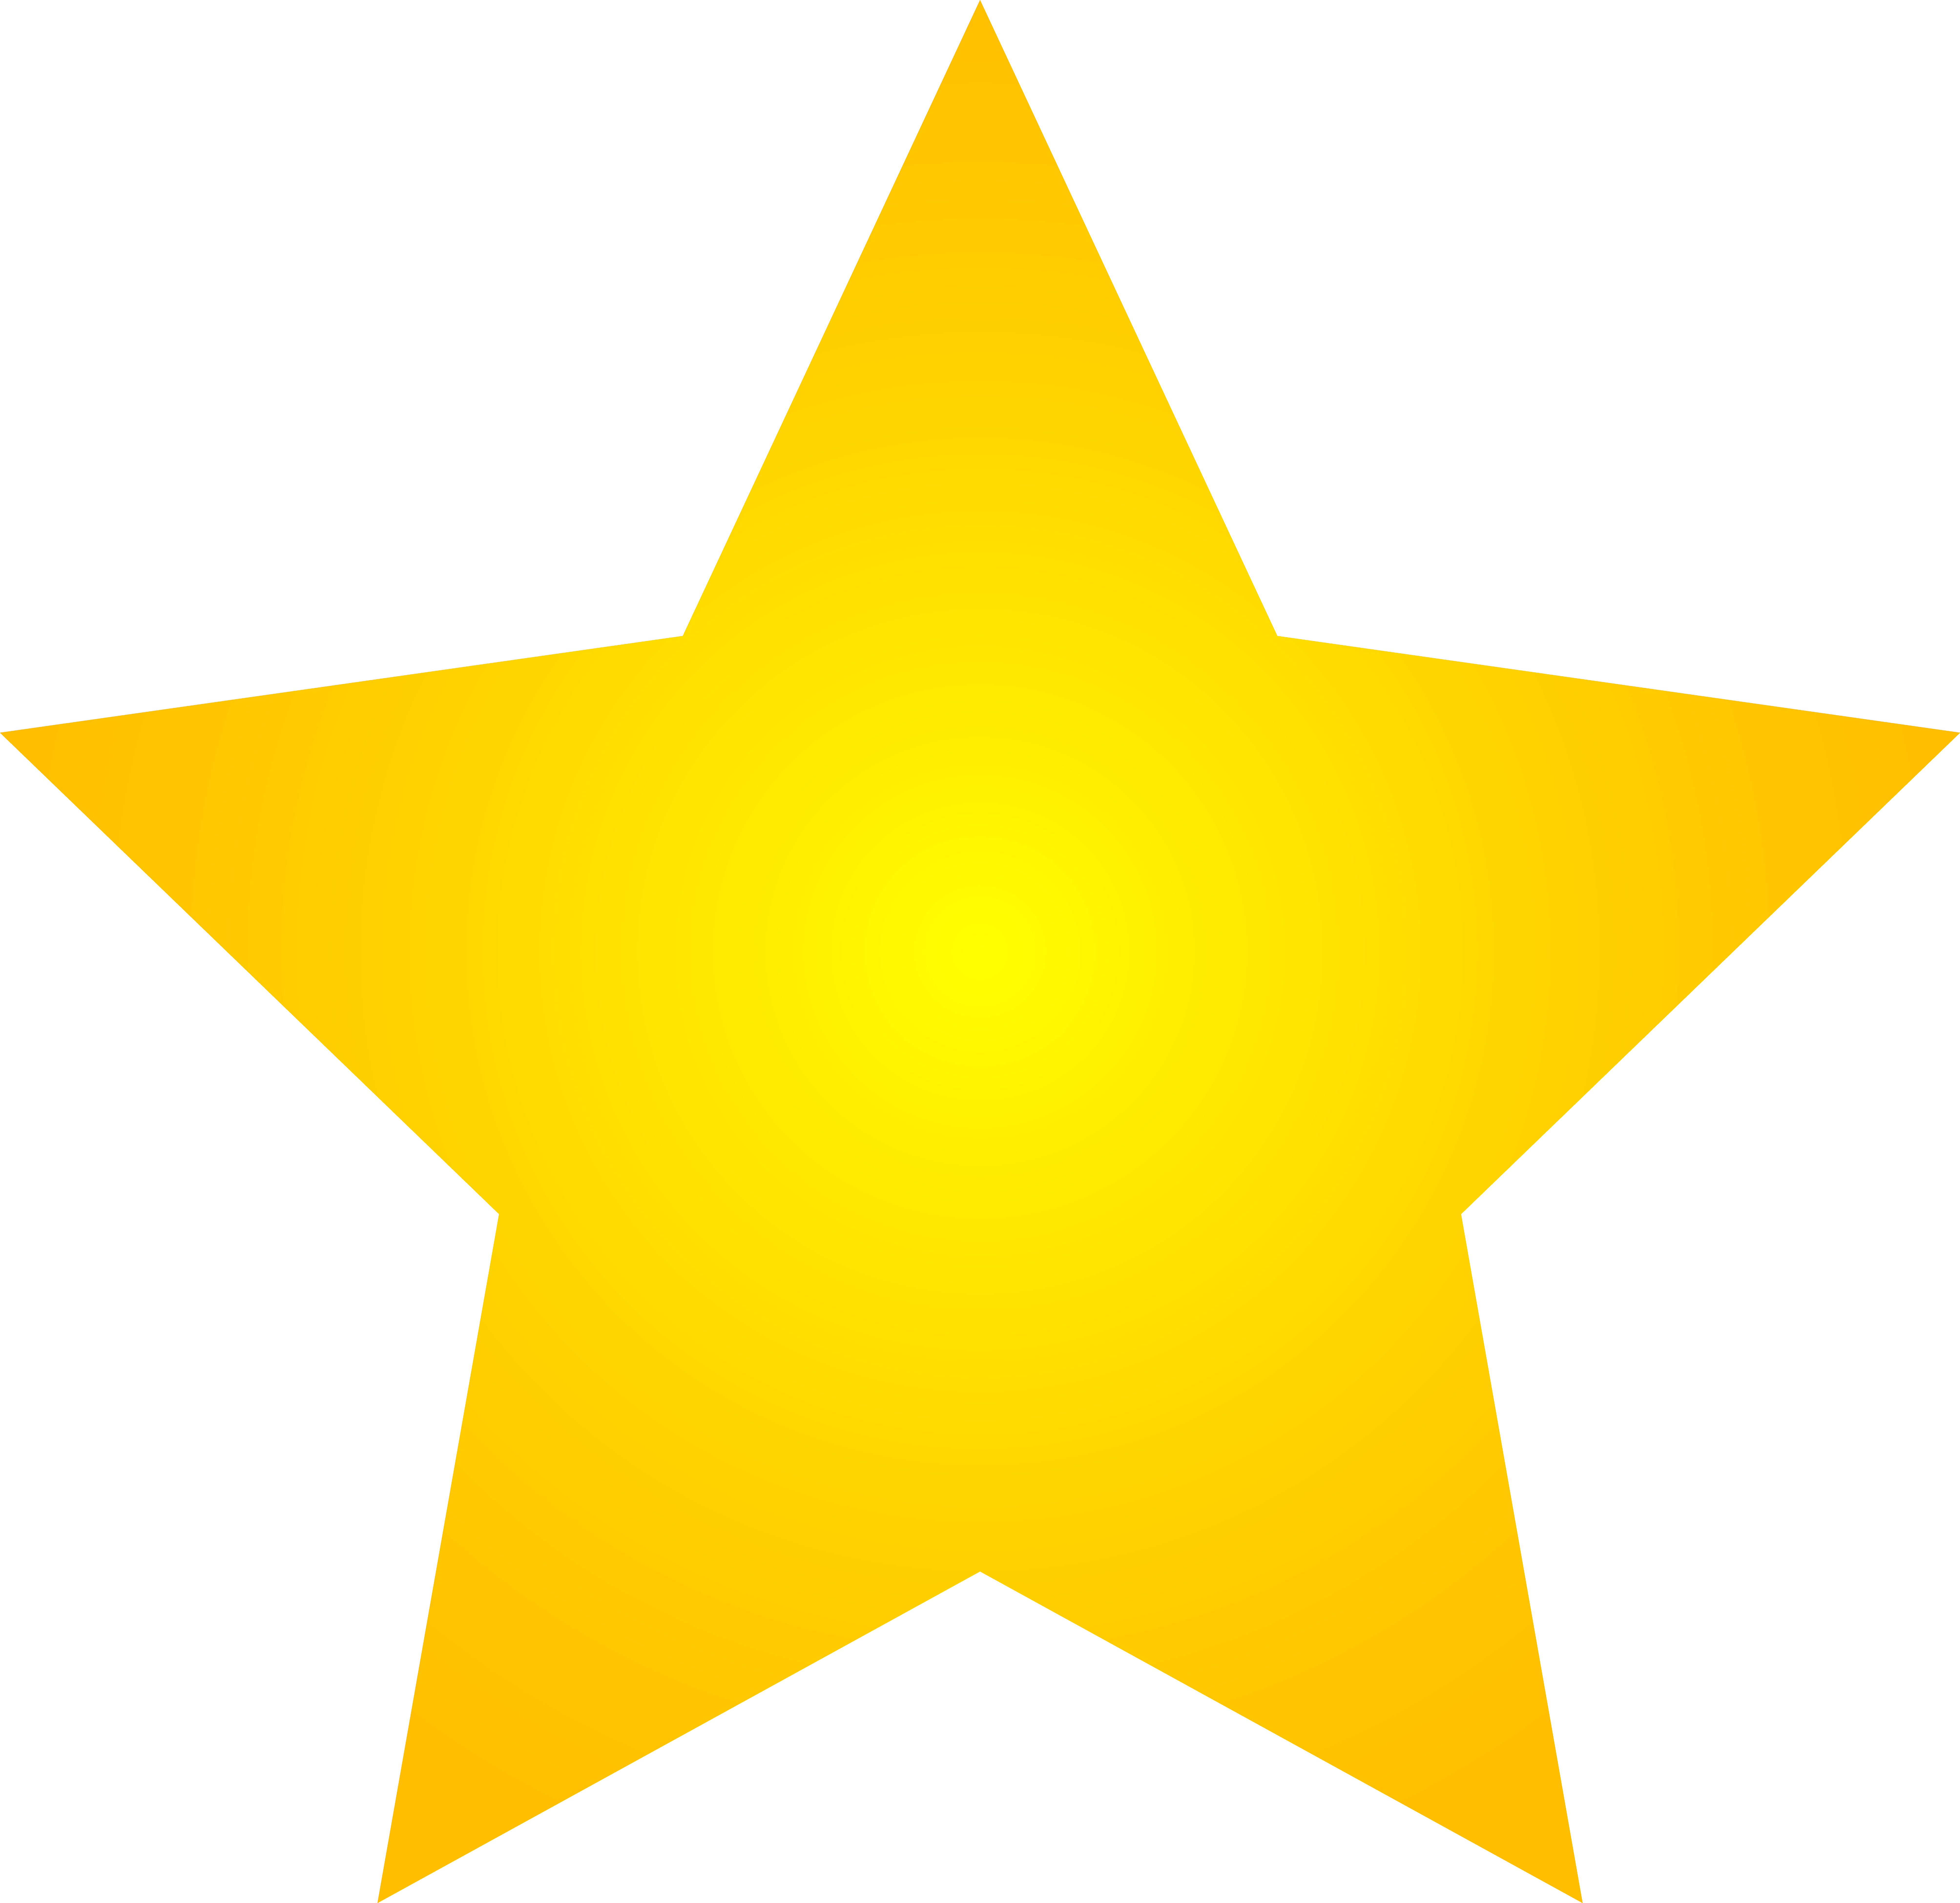 Yellow Stars PNG HD Transparent Yellow Stars HD.PNG Images. | PlusPNG